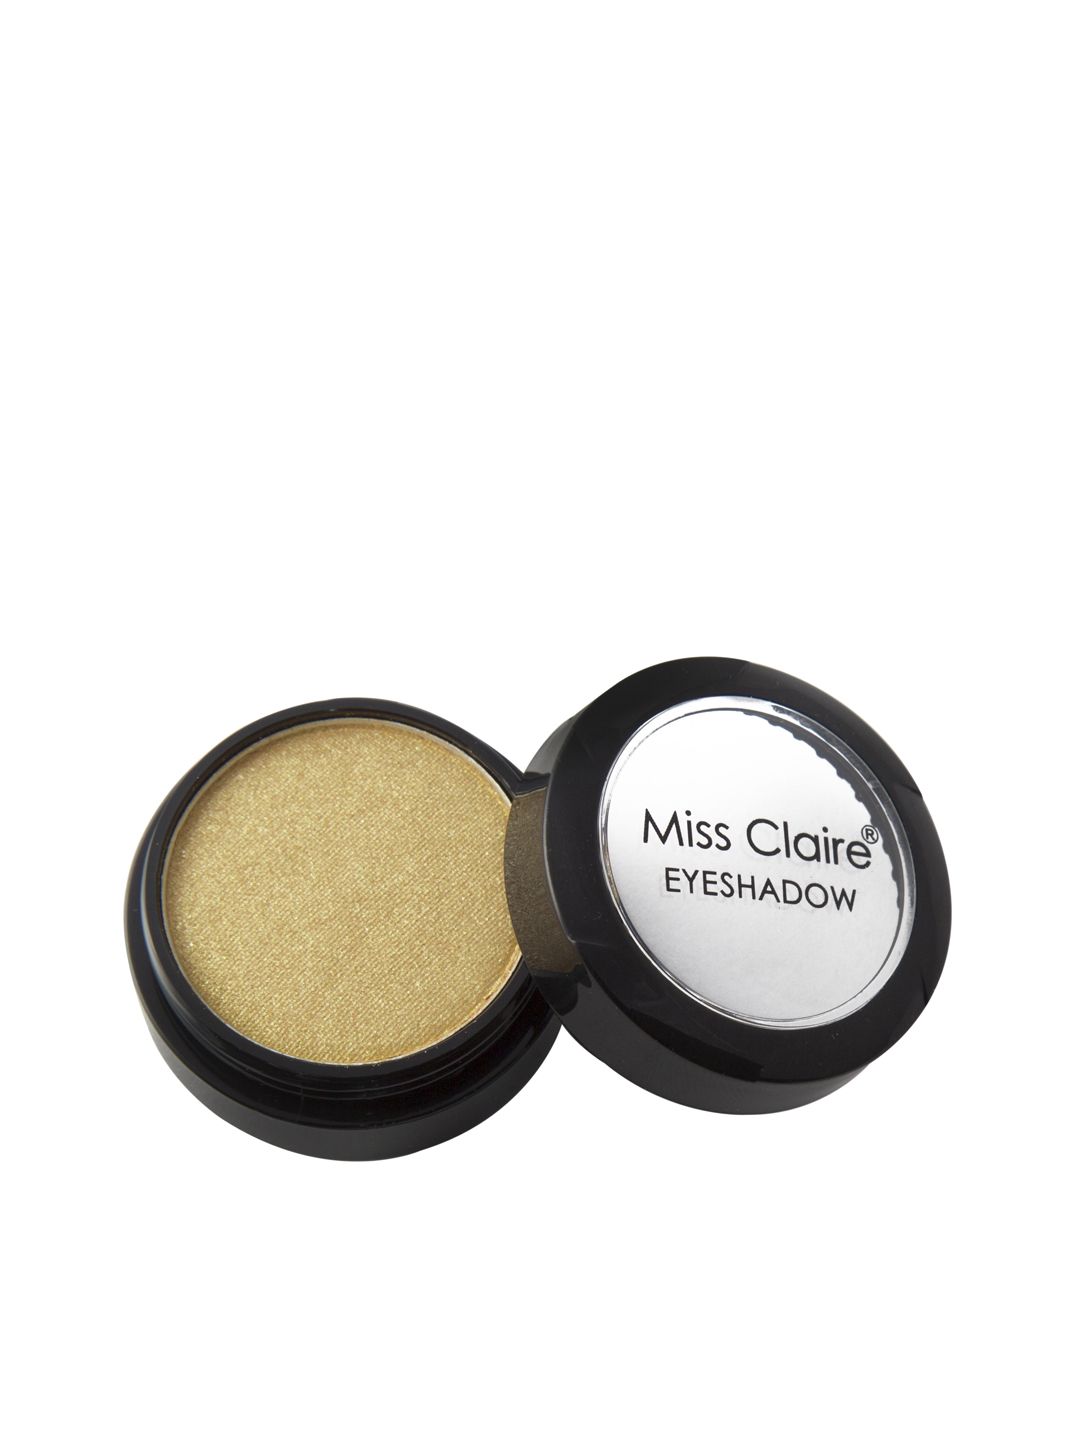 Miss Claire 0999 Single Eyeshadow 2 g Price in India